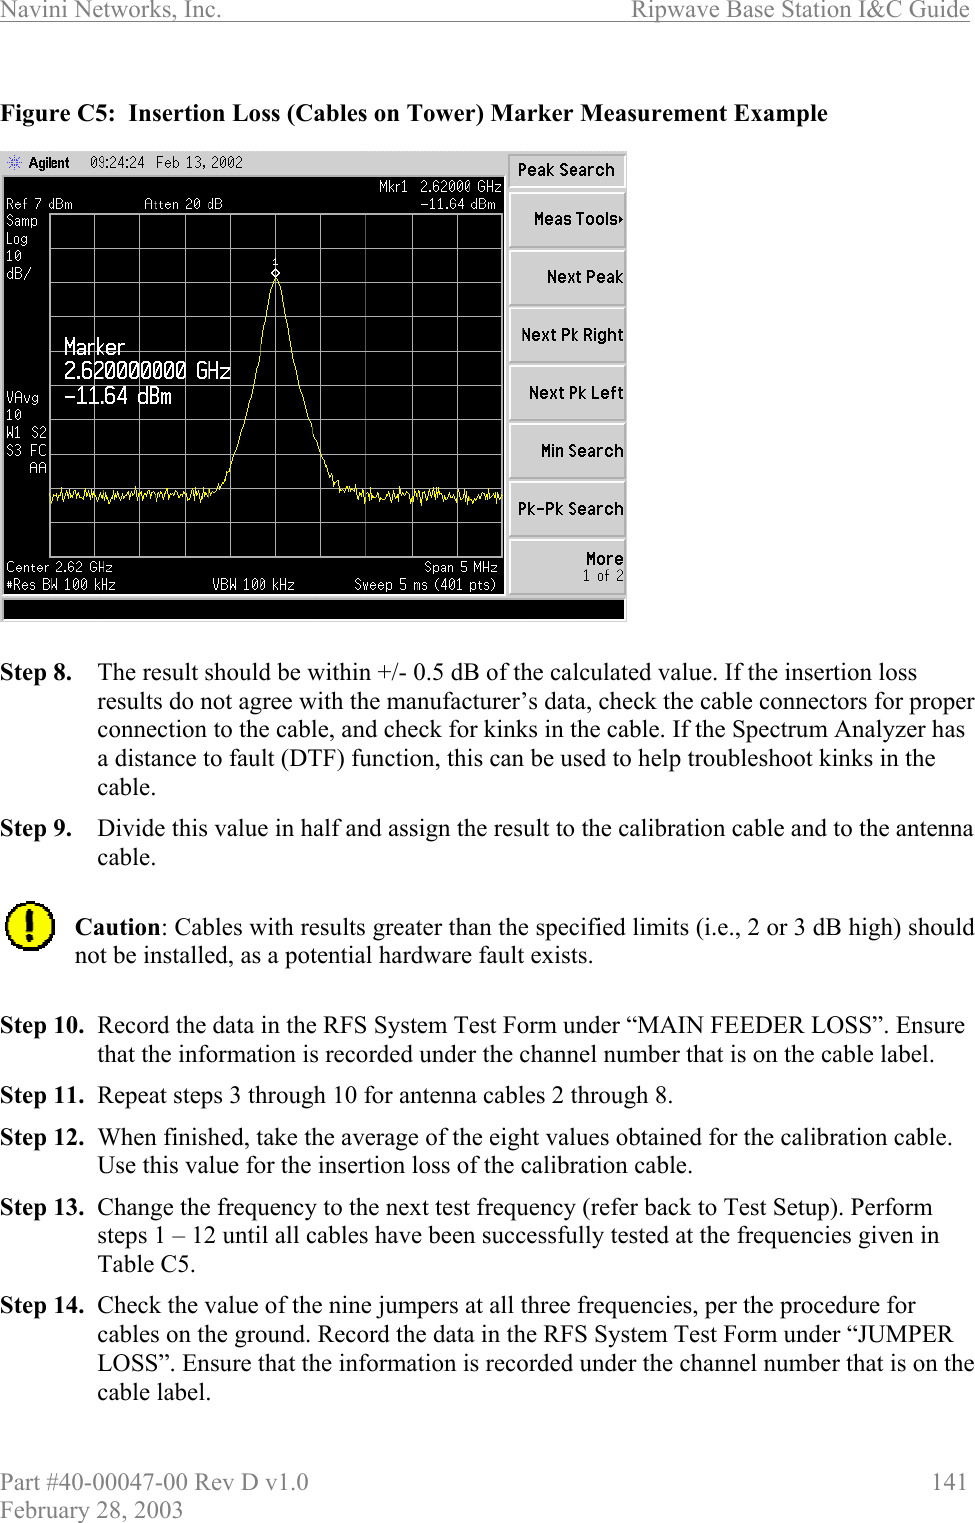 Navini Networks, Inc.                          Ripwave Base Station I&amp;C Guide Part #40-00047-00 Rev D v1.0                     141 February 28, 2003  Figure C5:  Insertion Loss (Cables on Tower) Marker Measurement Example                   Step 8.  The result should be within +/- 0.5 dB of the calculated value. If the insertion loss results do not agree with the manufacturer’s data, check the cable connectors for proper connection to the cable, and check for kinks in the cable. If the Spectrum Analyzer has a distance to fault (DTF) function, this can be used to help troubleshoot kinks in the cable.  Step 9.  Divide this value in half and assign the result to the calibration cable and to the antenna cable.  Caution: Cables with results greater than the specified limits (i.e., 2 or 3 dB high) should not be installed, as a potential hardware fault exists.  Step 10.  Record the data in the RFS System Test Form under “MAIN FEEDER LOSS”. Ensure that the information is recorded under the channel number that is on the cable label. Step 11.  Repeat steps 3 through 10 for antenna cables 2 through 8.  Step 12.  When finished, take the average of the eight values obtained for the calibration cable. Use this value for the insertion loss of the calibration cable. Step 13.  Change the frequency to the next test frequency (refer back to Test Setup). Perform steps 1 – 12 until all cables have been successfully tested at the frequencies given in Table C5. Step 14.  Check the value of the nine jumpers at all three frequencies, per the procedure for cables on the ground. Record the data in the RFS System Test Form under “JUMPER LOSS”. Ensure that the information is recorded under the channel number that is on the cable label. 